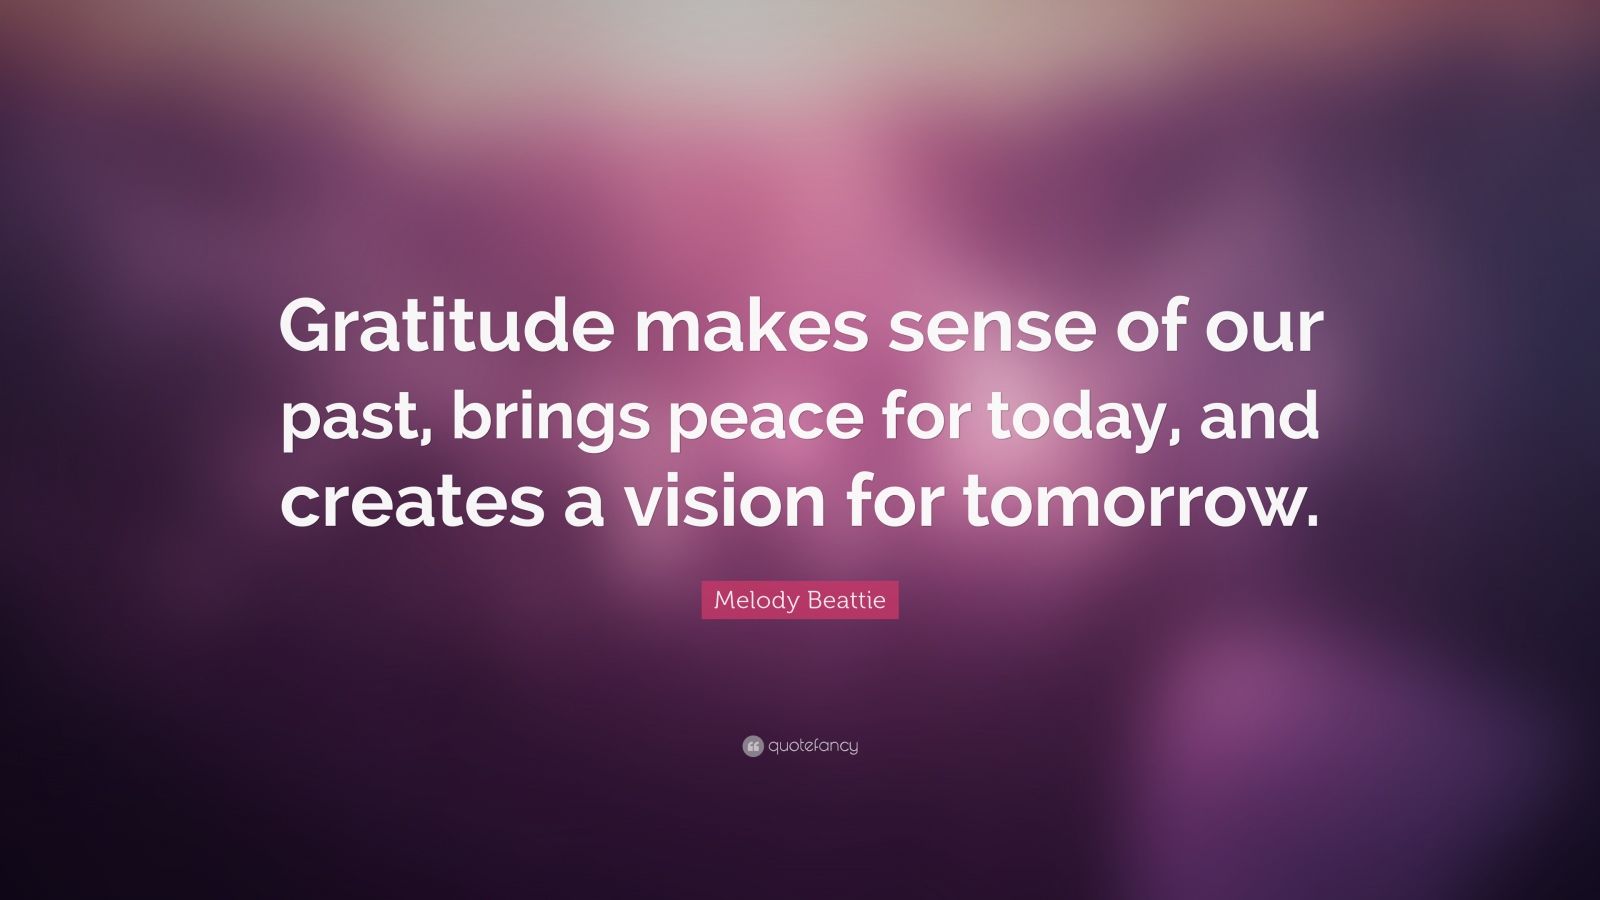 Melody Beattie Quote: “Gratitude makes sense of our past, brings peace ...